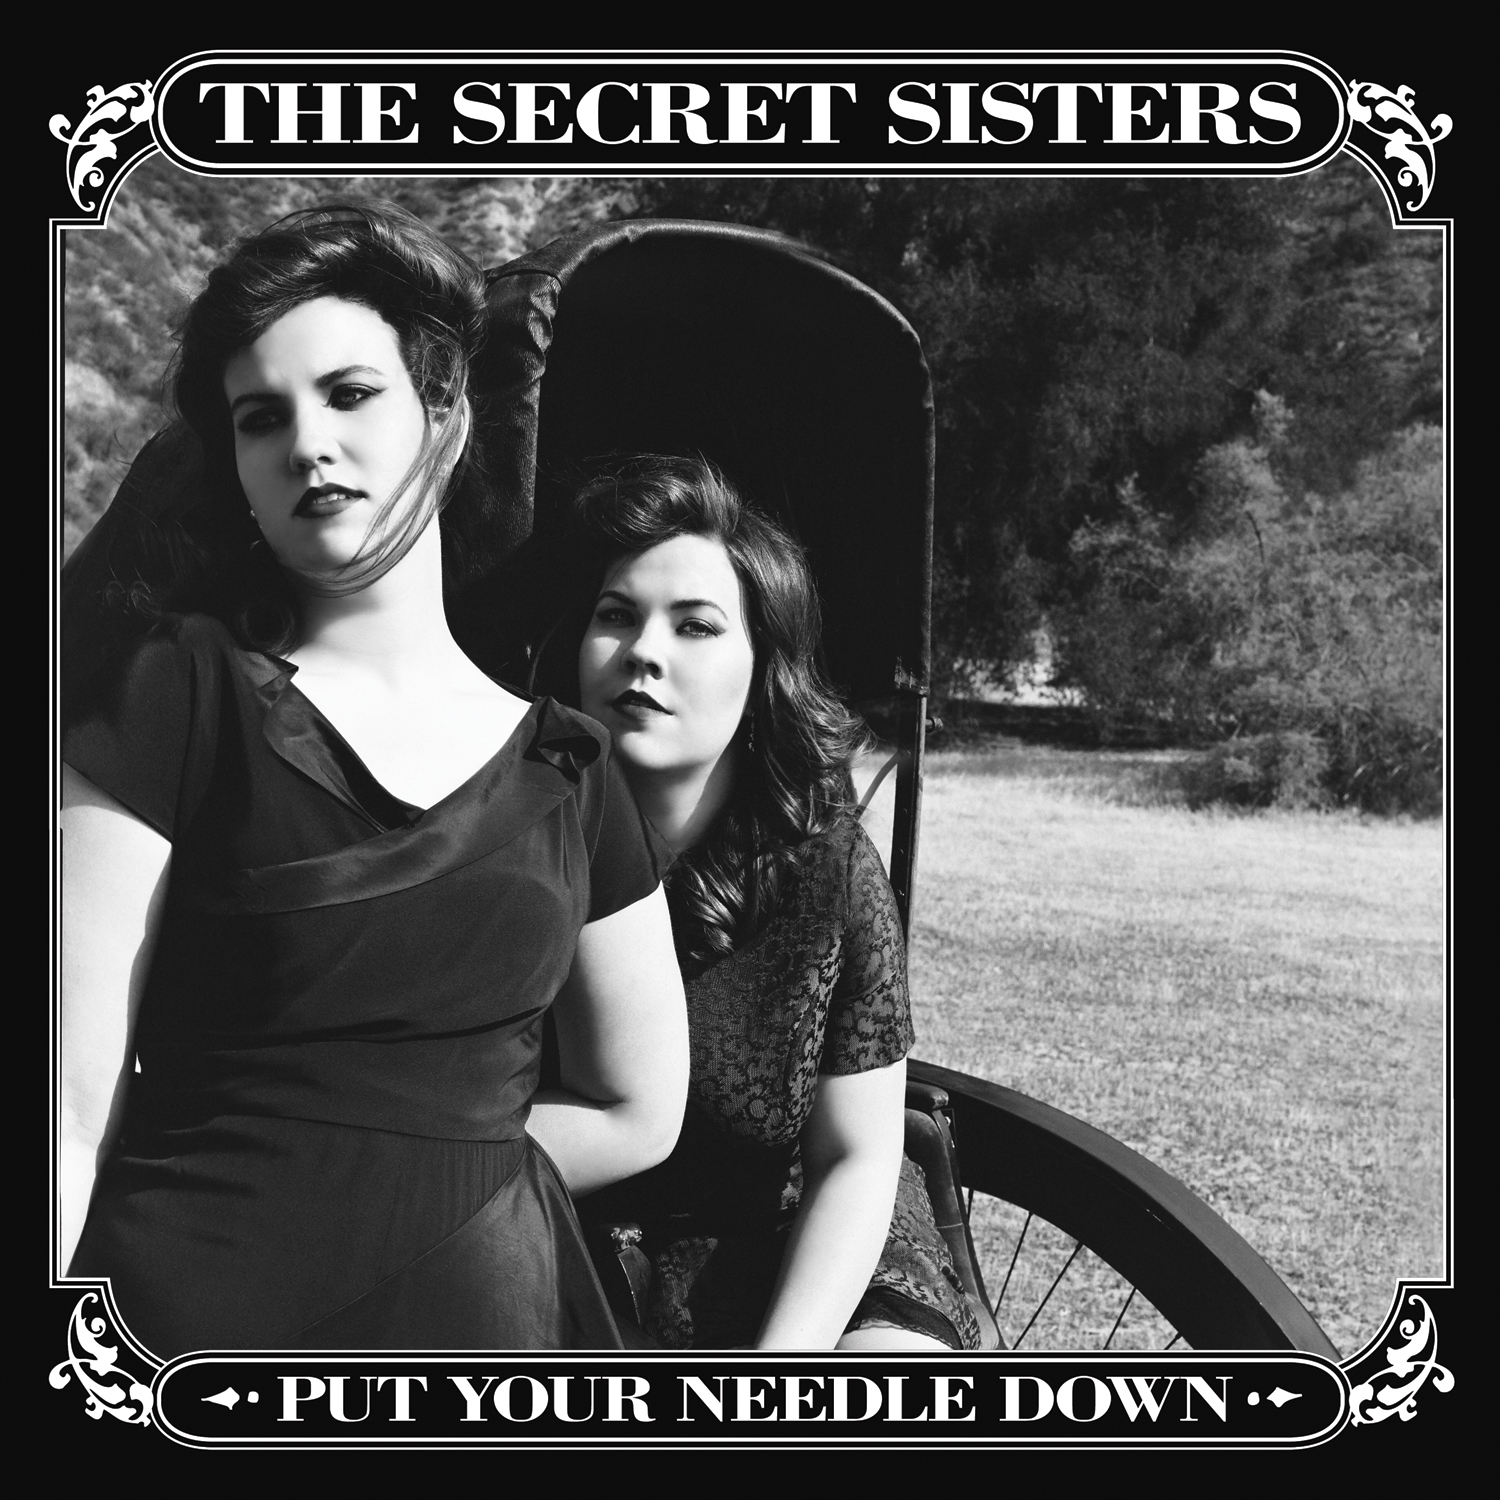 The Secret Sisters: Put Your Needle Down